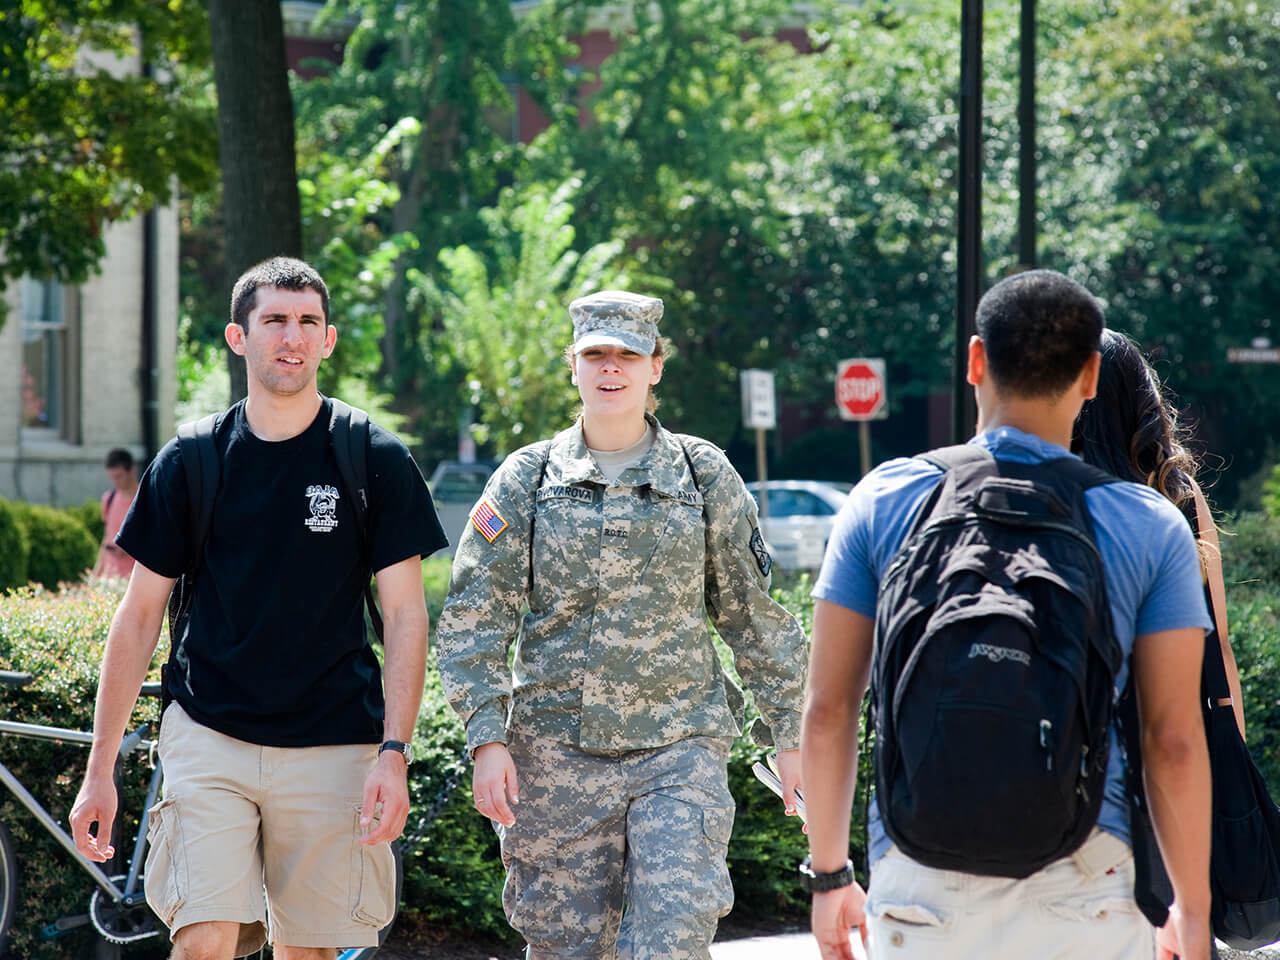 Student in military clothing walking with another student